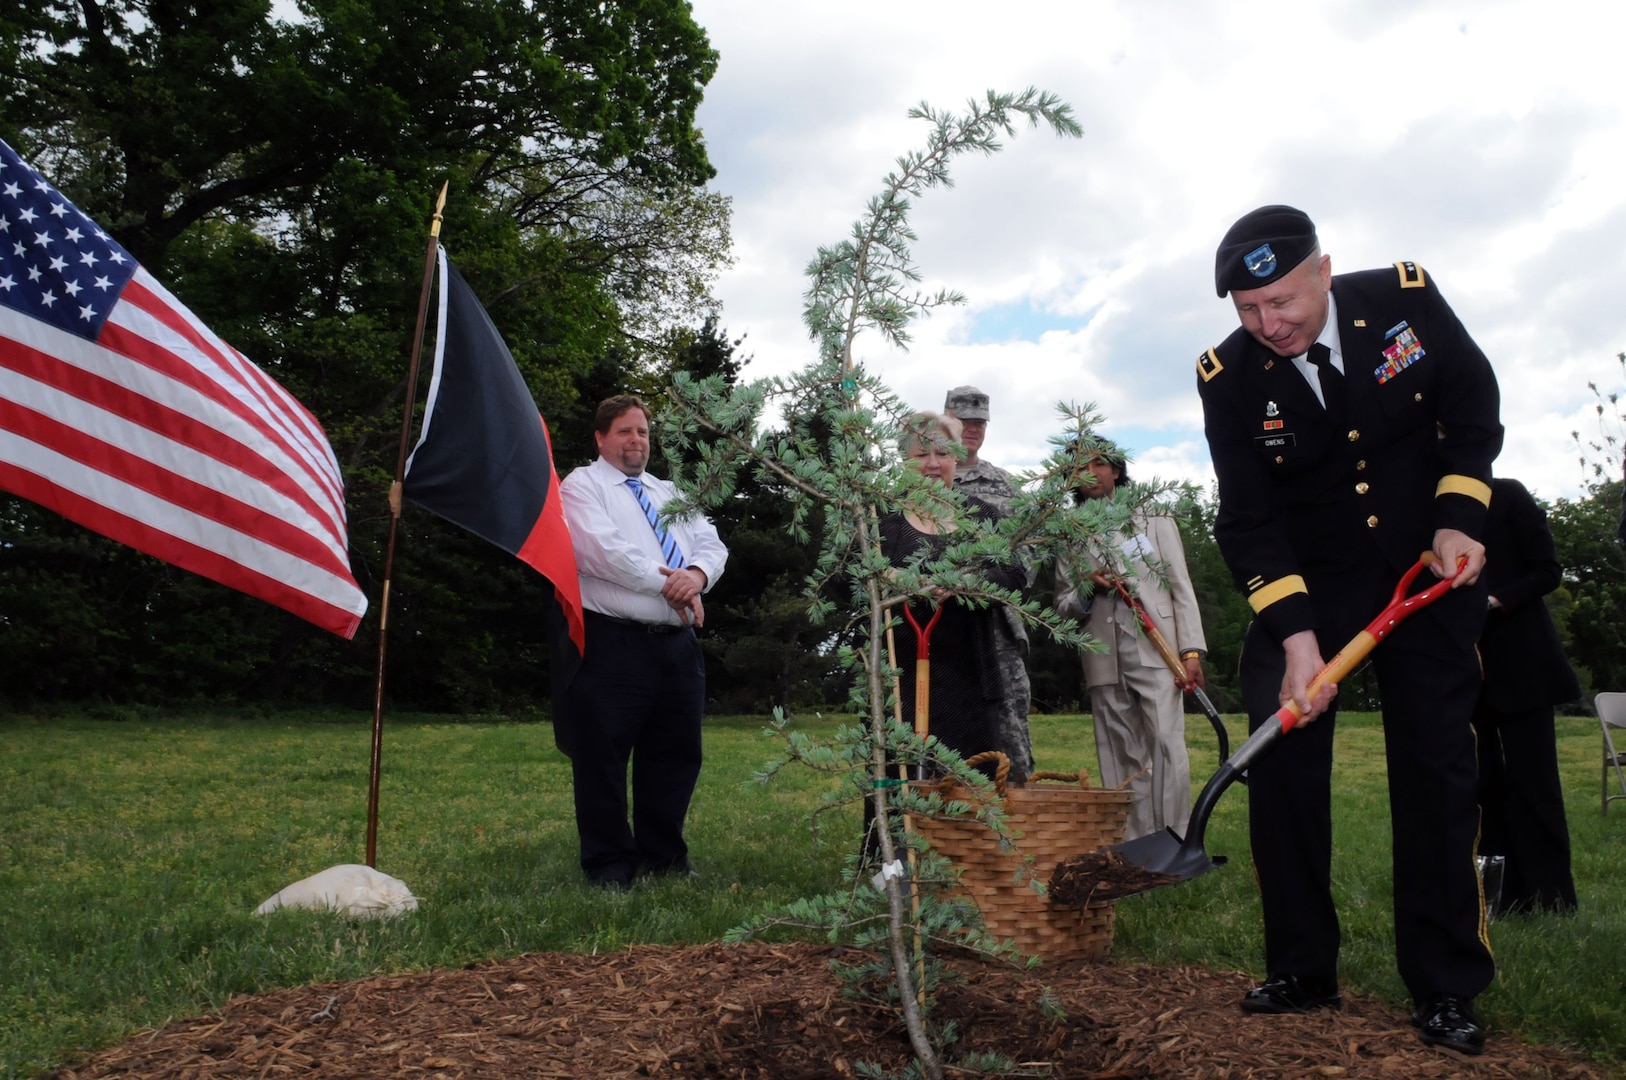 Army Maj. Gen. Darren Owens, special assistant to the director, Army
National Guard, helps plant a tree symbolizing cooperation between Afghan government officials and National Guard Agricultural Development Teams during a
ceremony at the National Arboretum in Washington, D.C